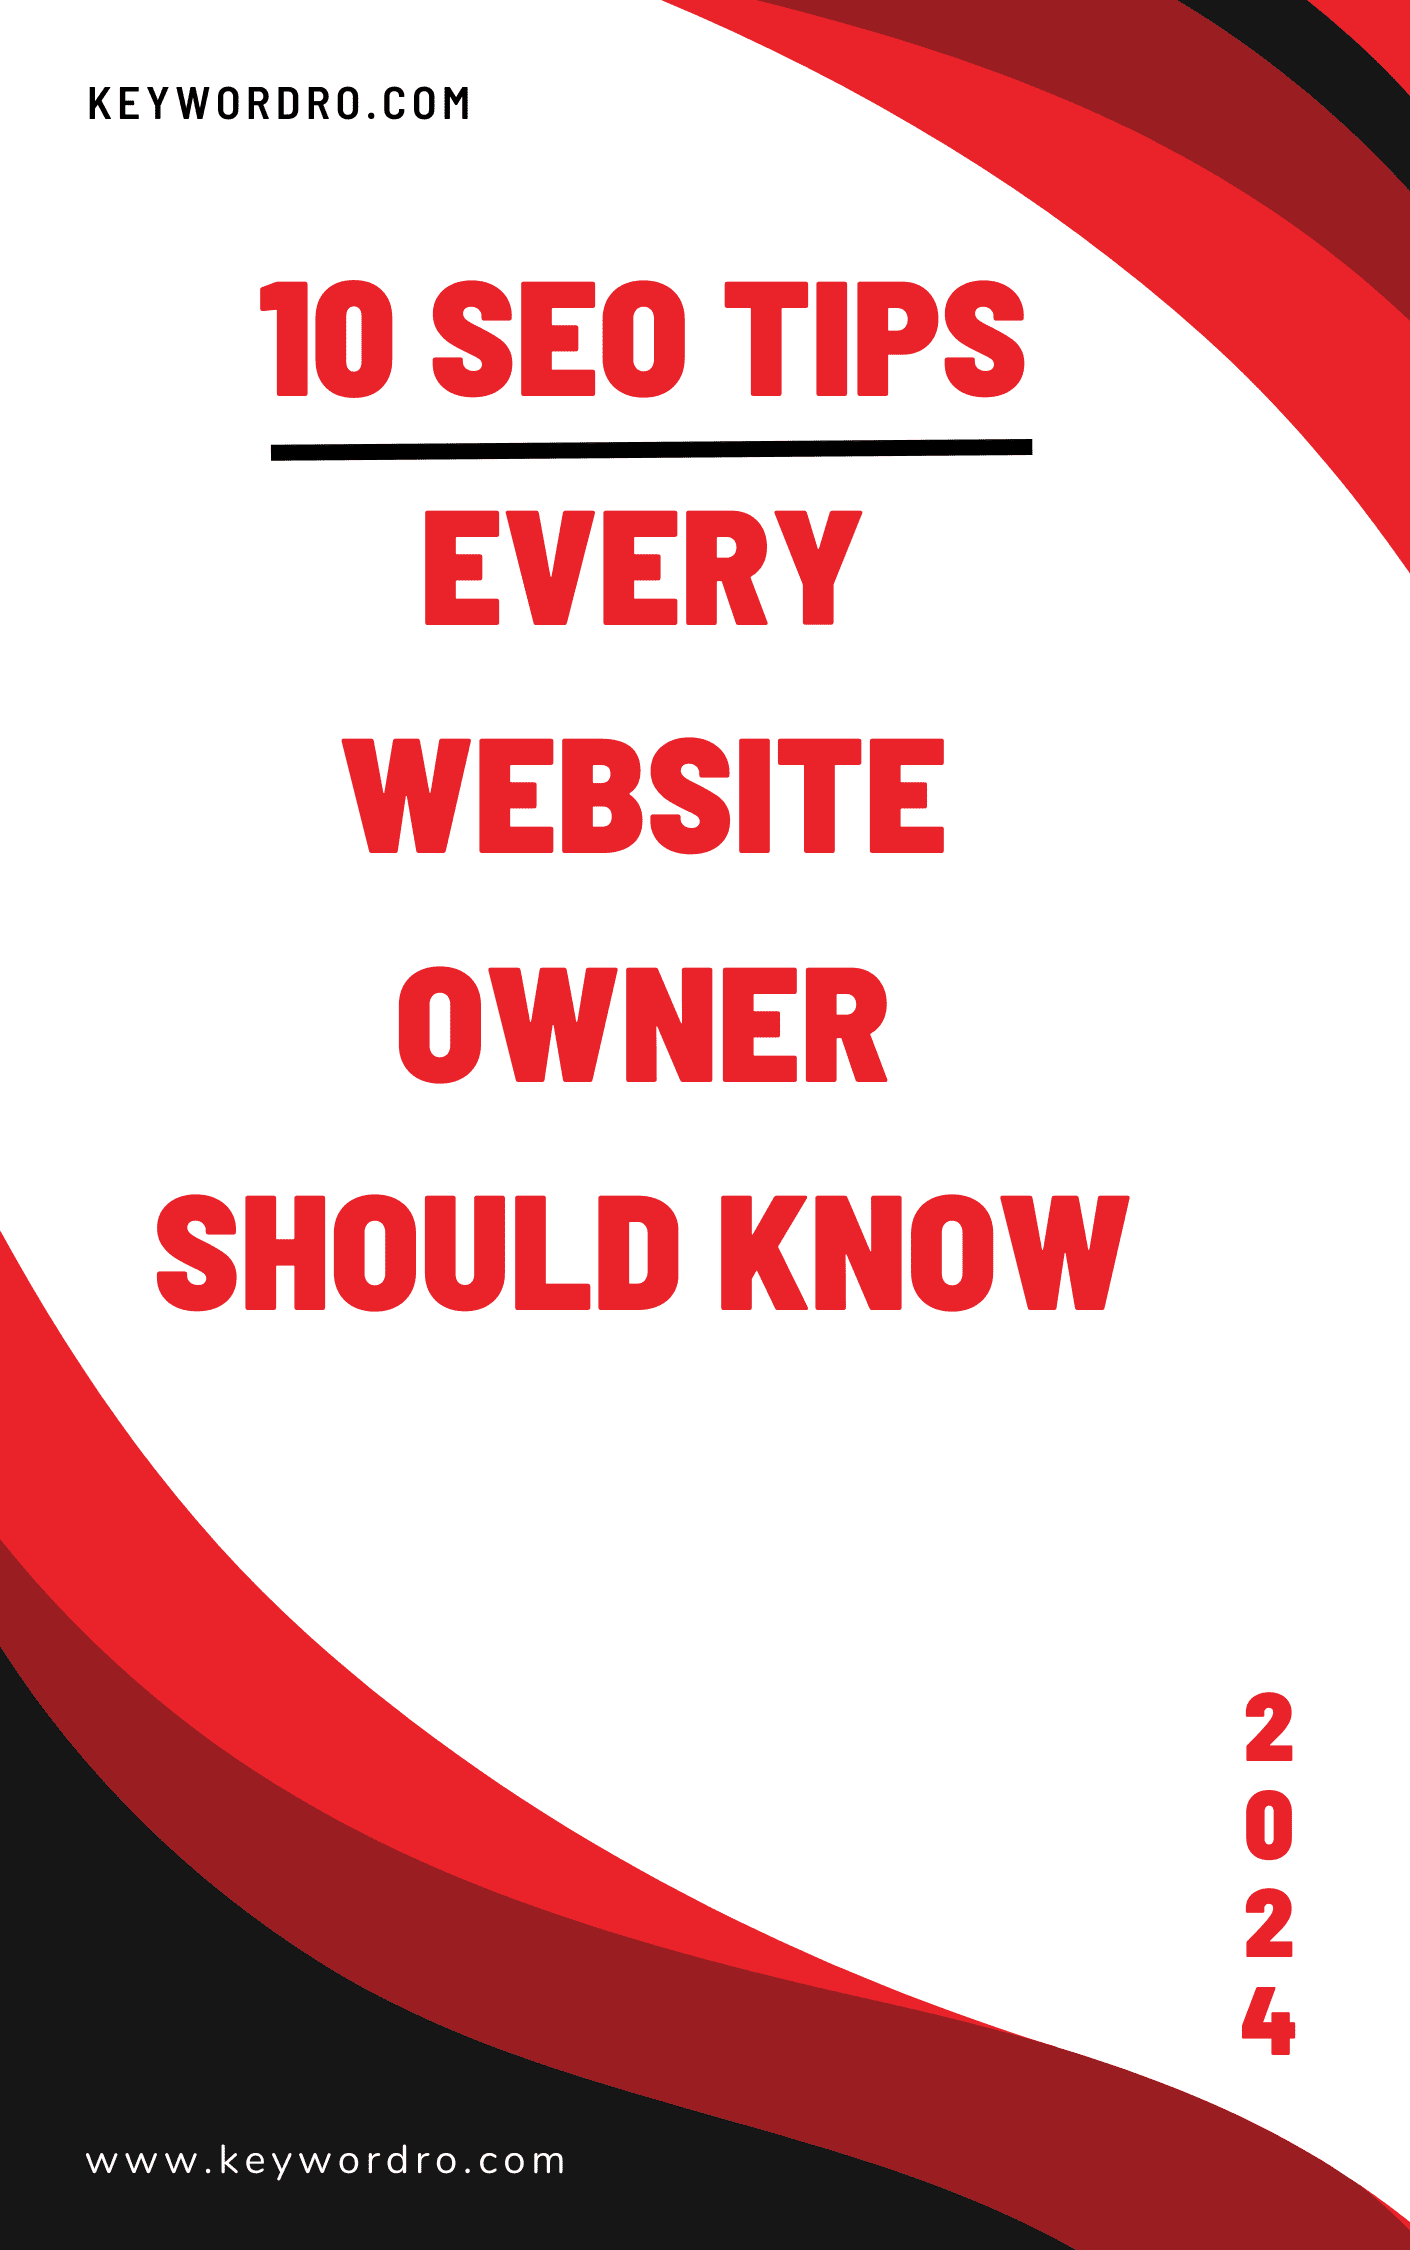 10 SEO tips every website owner should know Guide Ebook